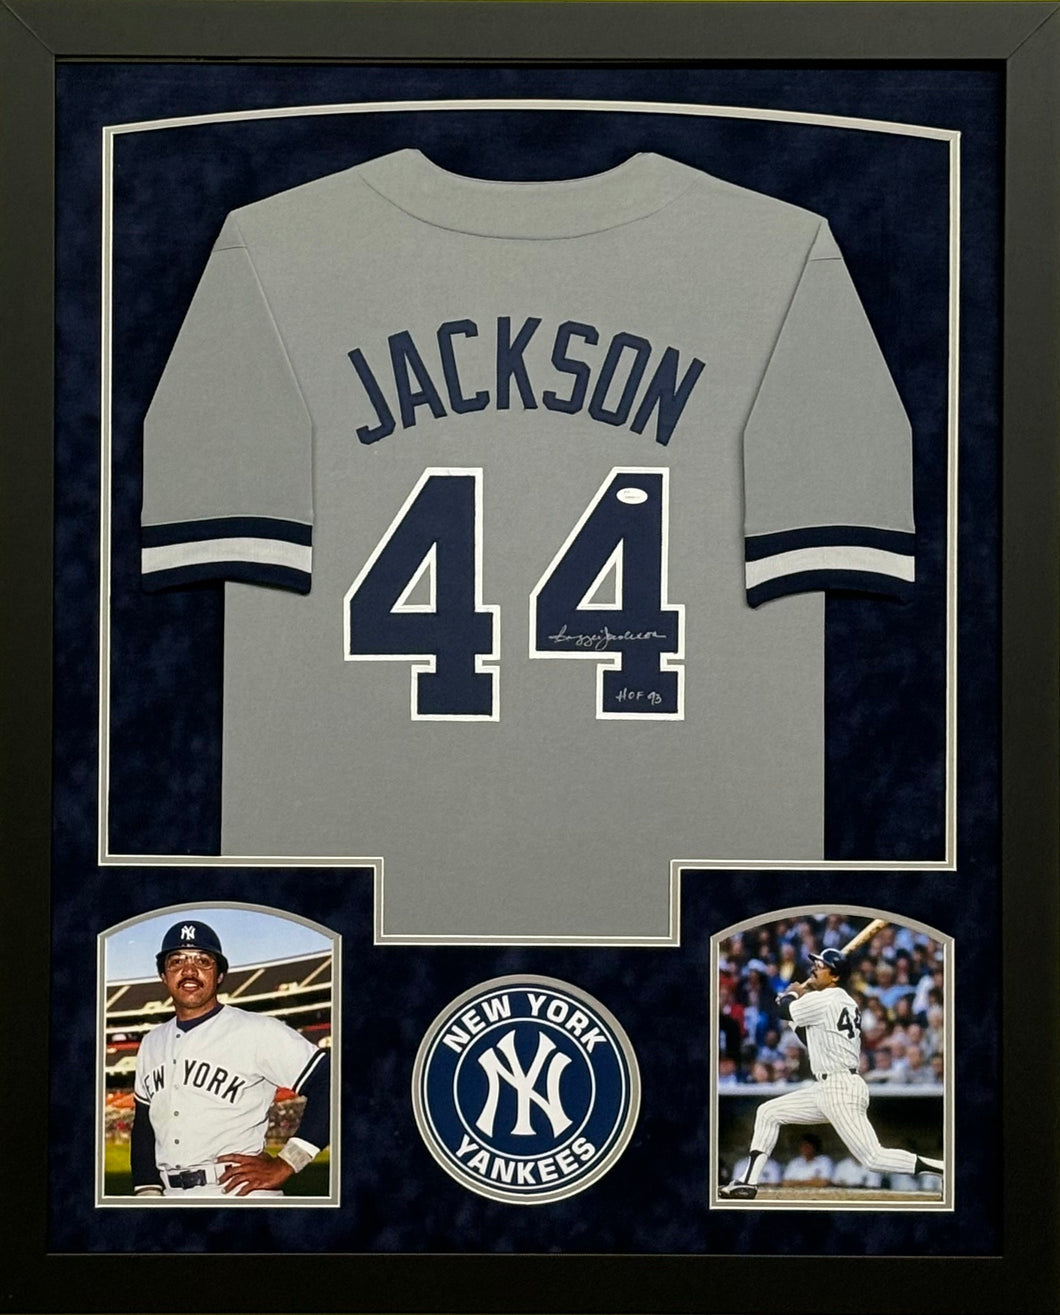 New York Yankees Reggie Jackson Signed Gray Jersey with HOF 93 Inscription Framed & Suede Matted with JSA COA